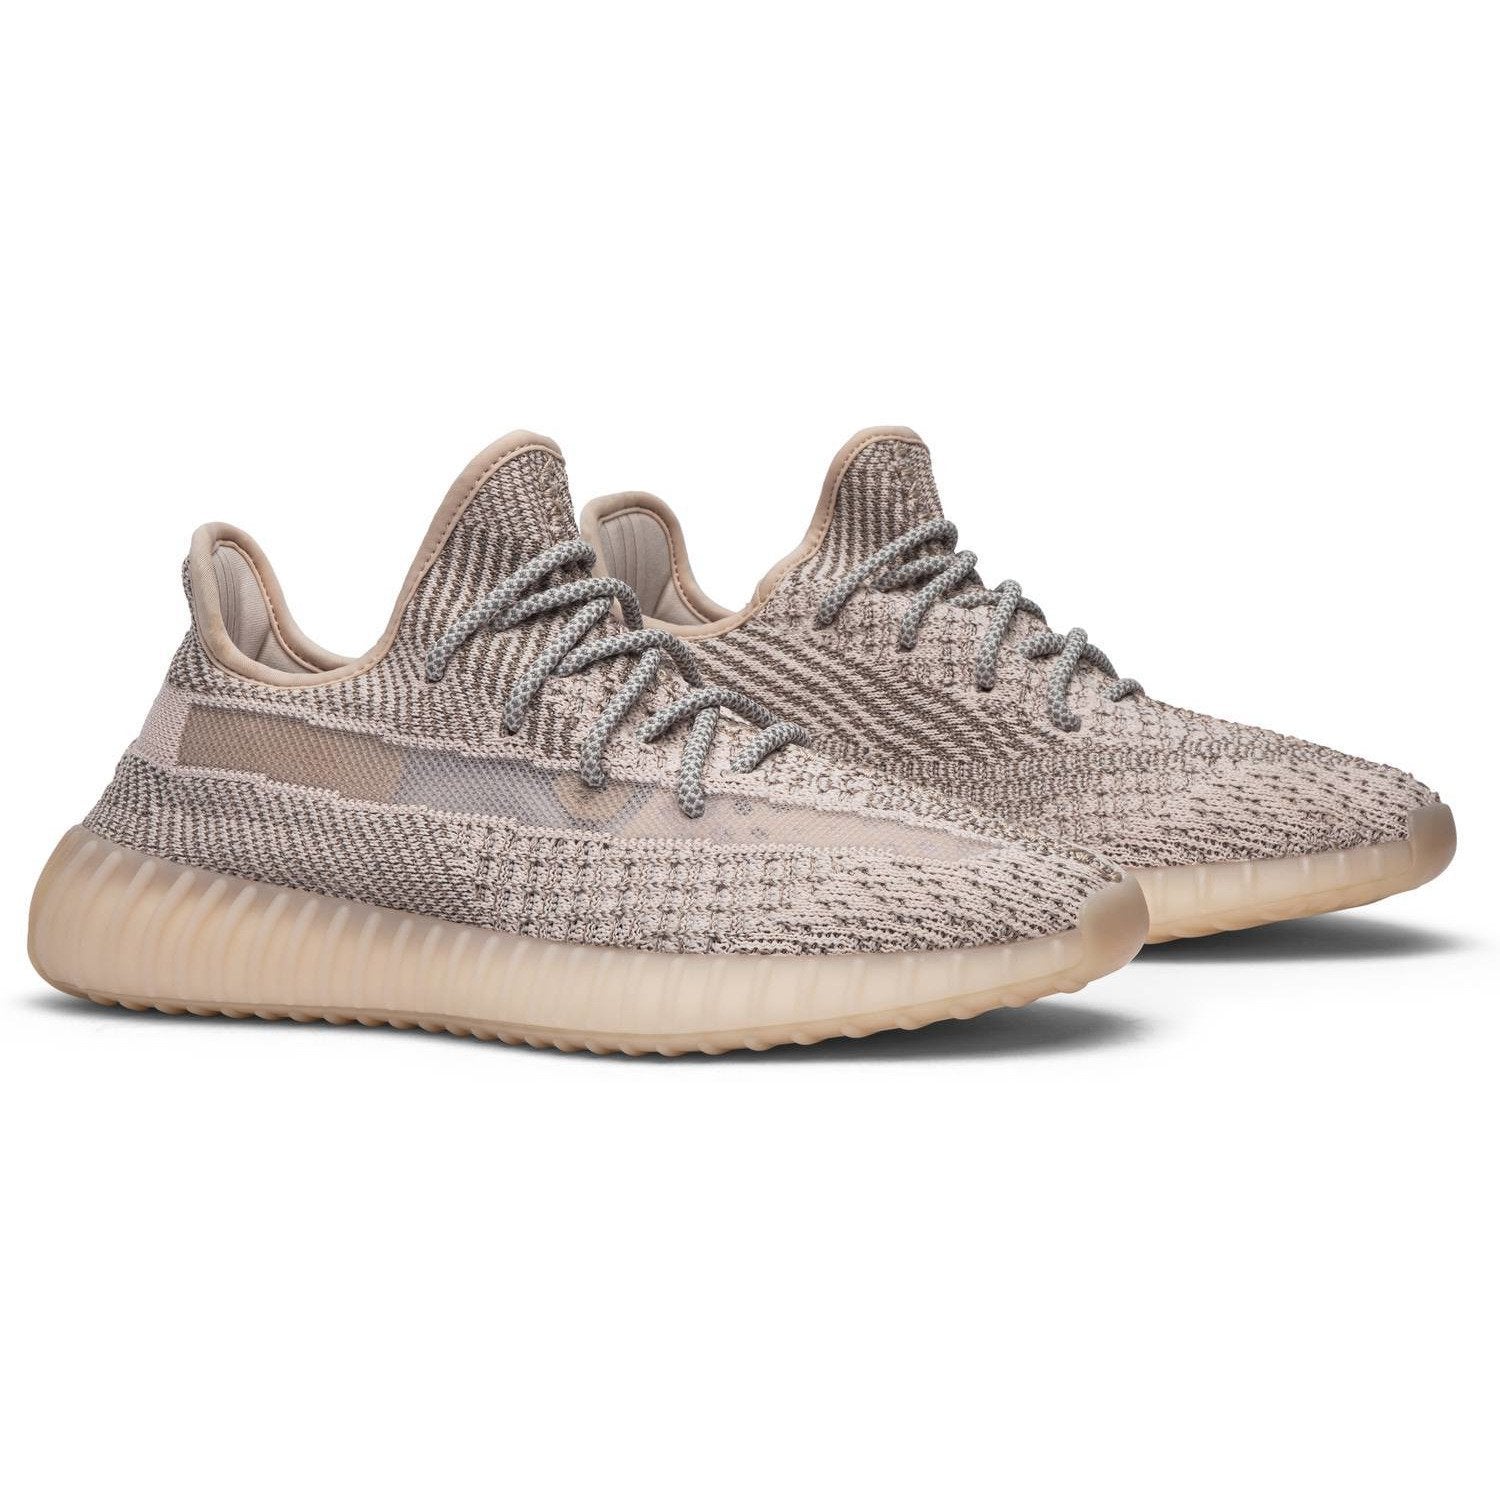 adidas Yeezy Boost 350 V2 'Synth Reflective' - After Burn